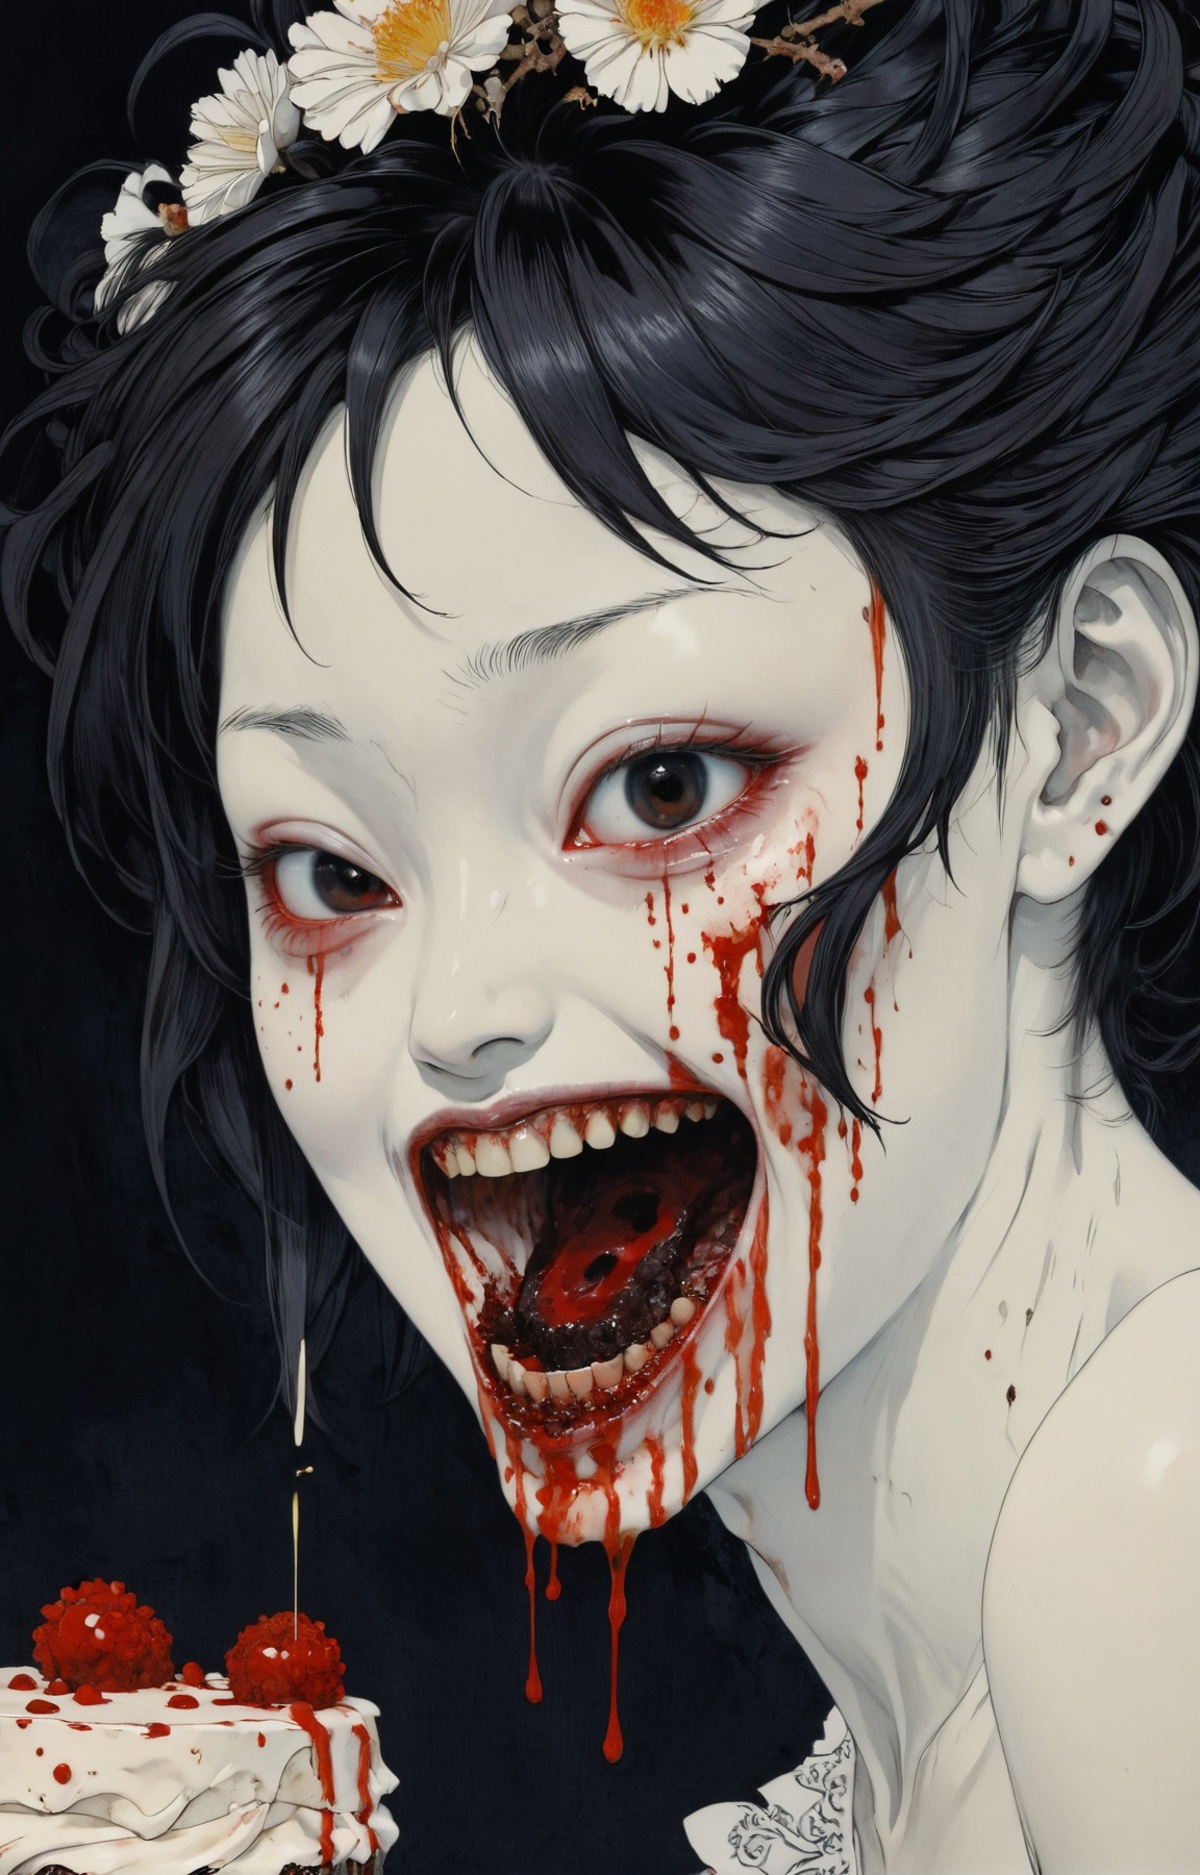 A person with a large mouth has blood dripping down their face.